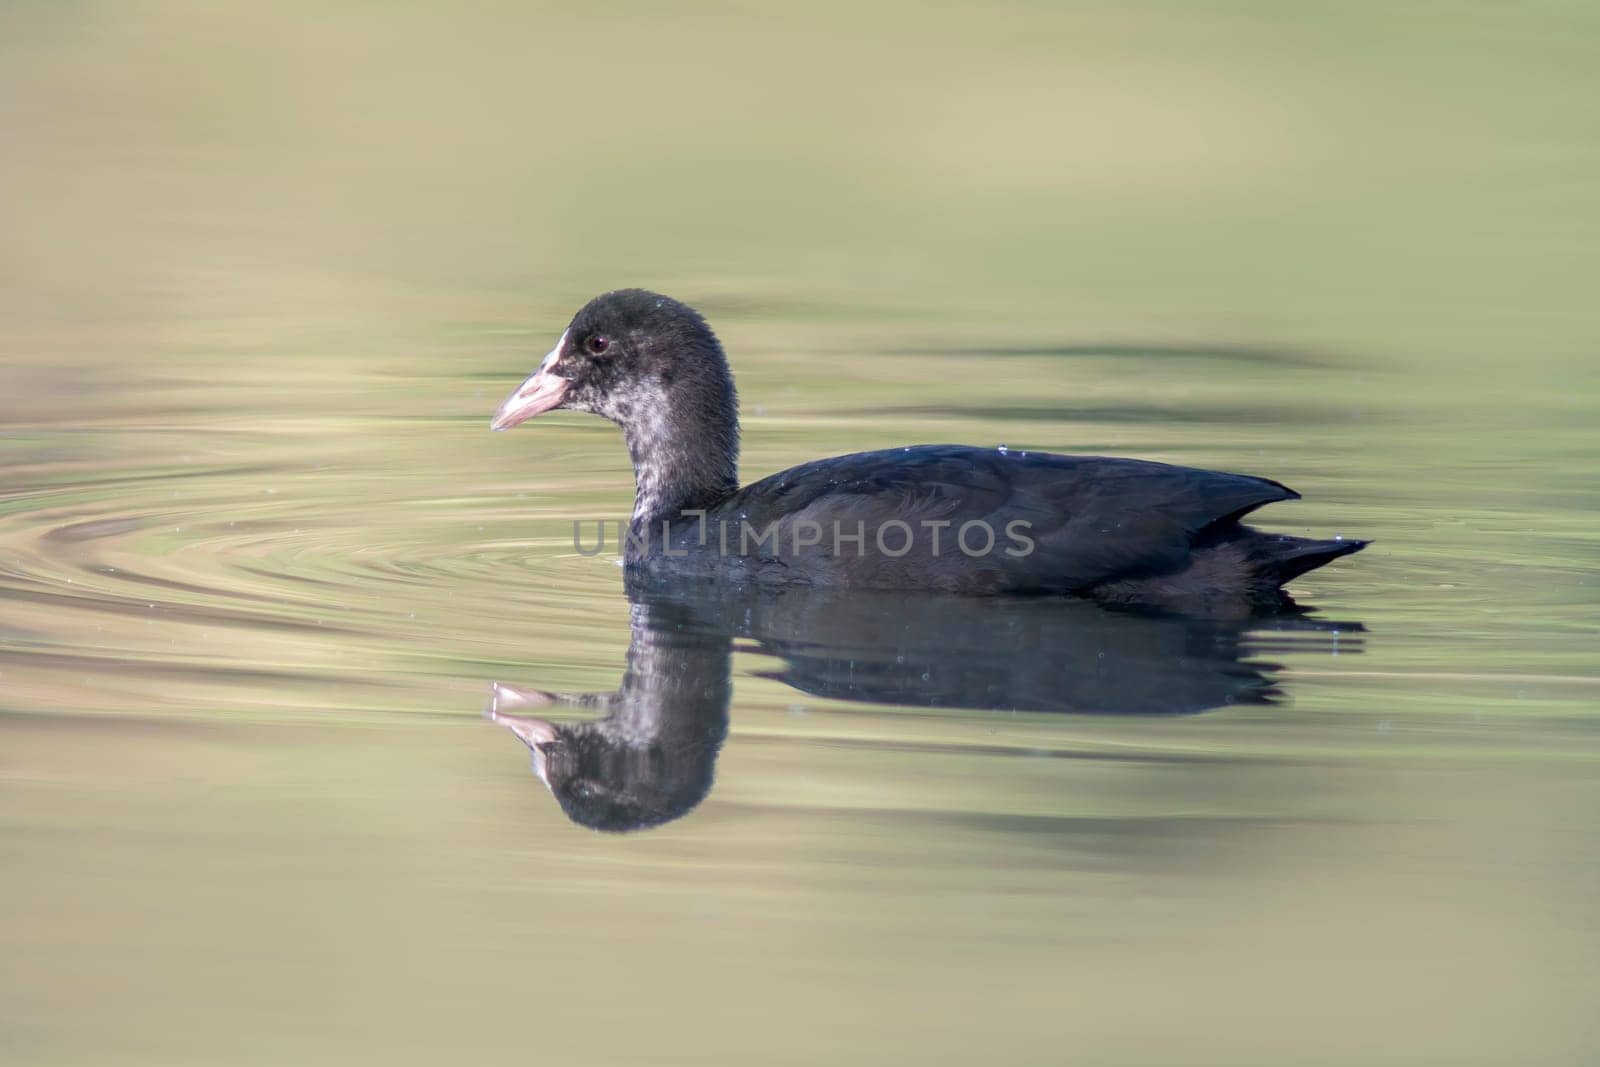 a coot swims on a pond by mario_plechaty_photography